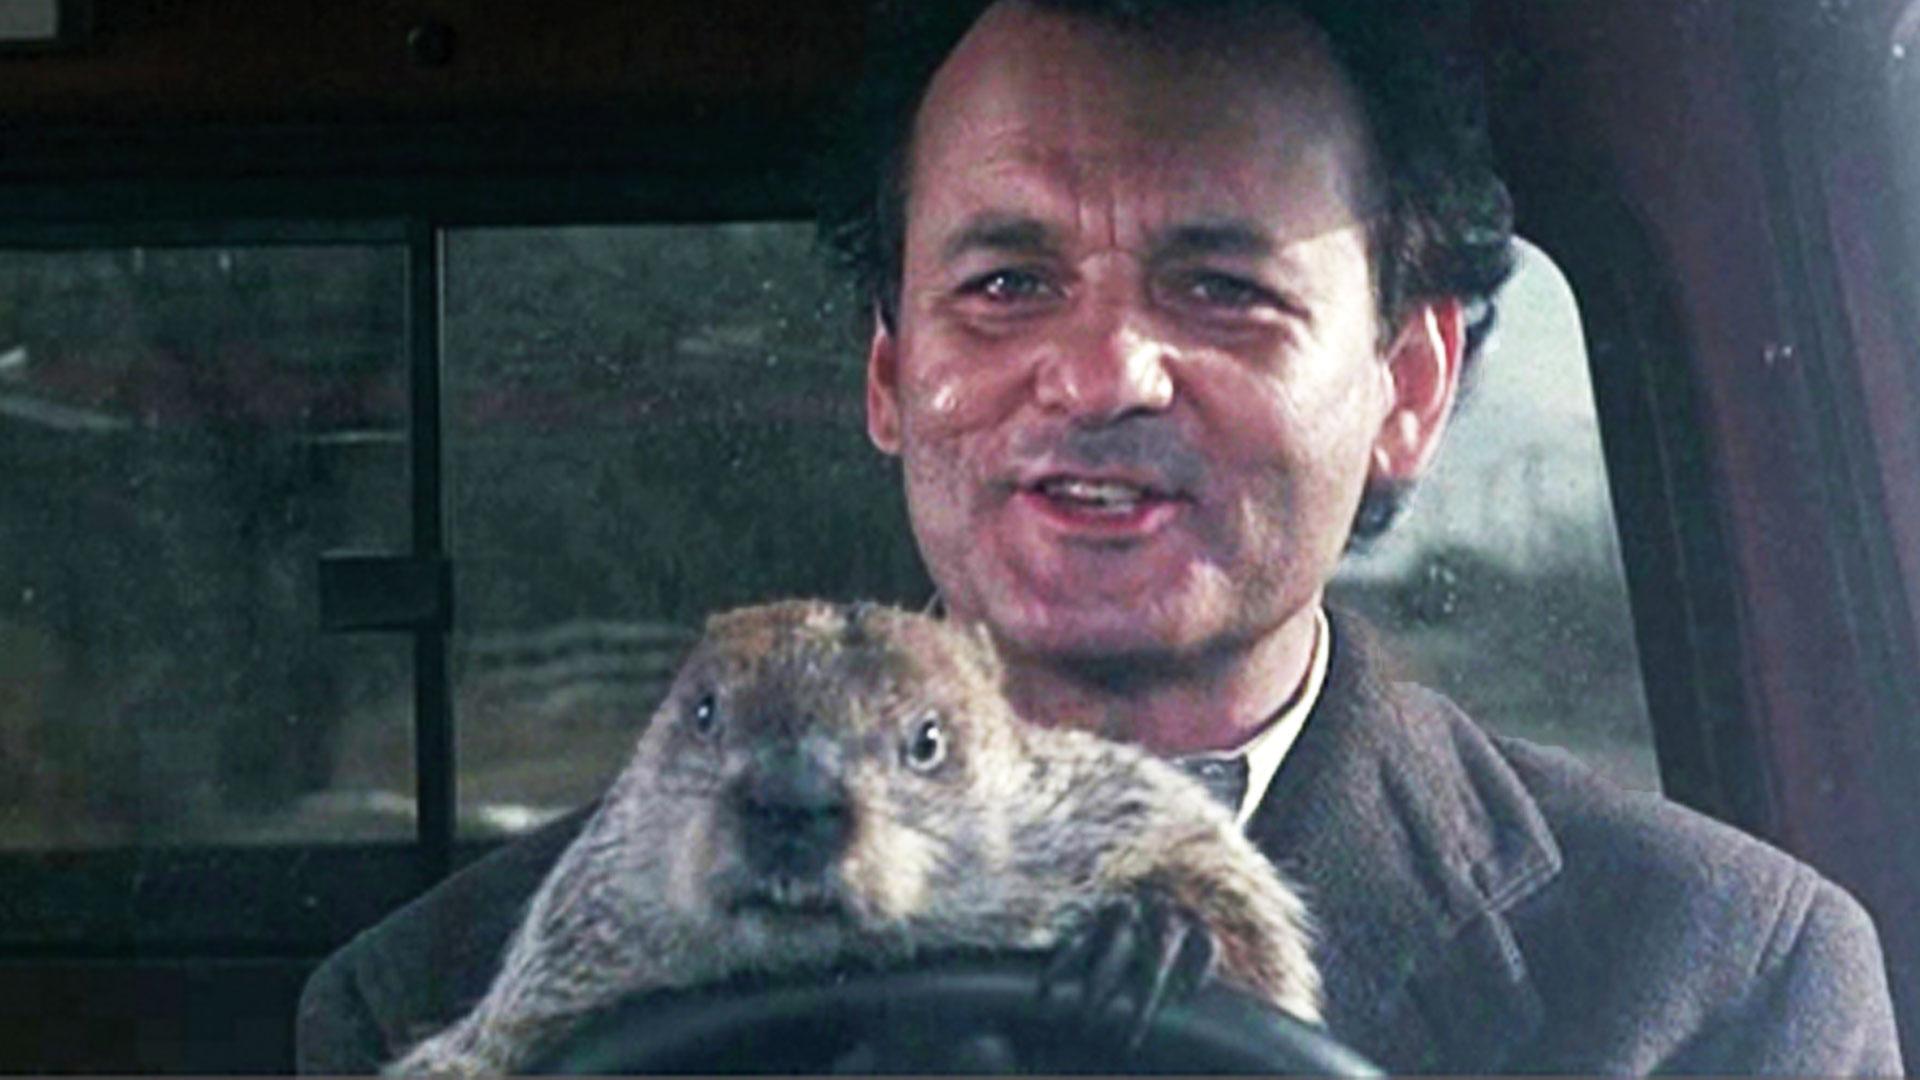 Groundhog Day Movie Wallpapers